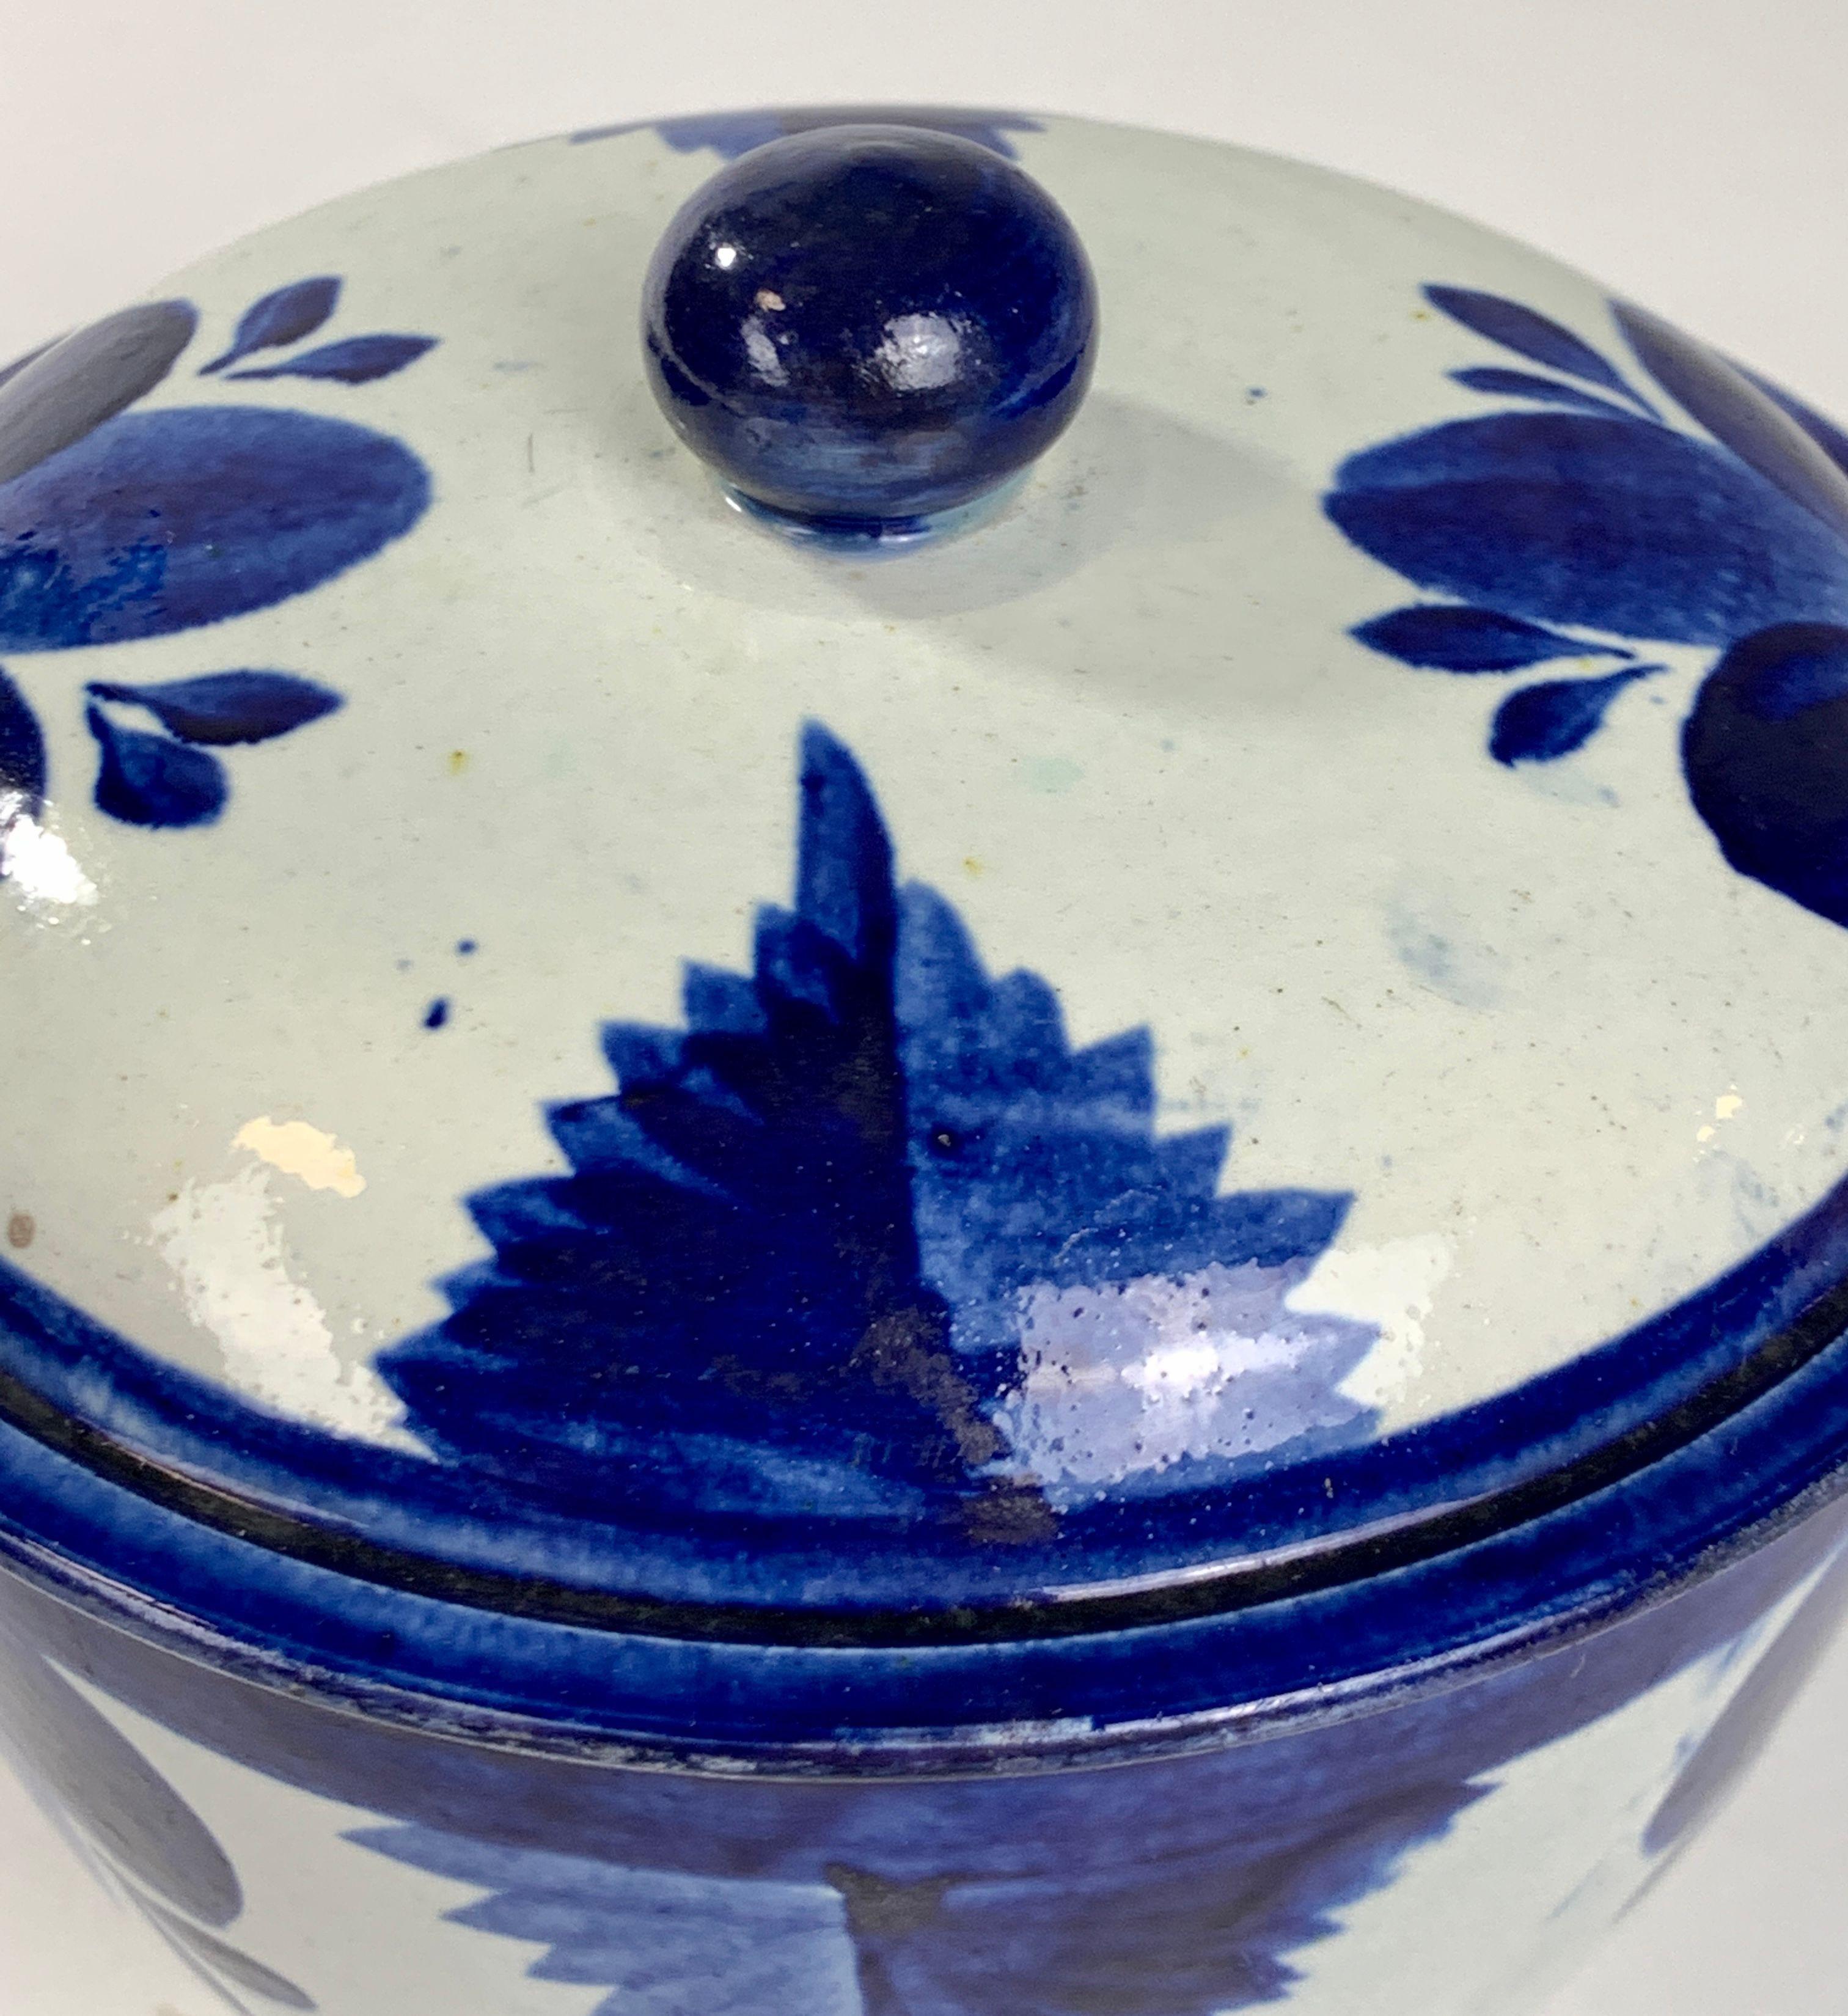 This lovely pearlware sugar box has the timeless appeal of soothing blue and white. Made in England in the early 19th century with blue decoration applied by hand using a stencil. Each design is slightly different, especially in the intensity of the